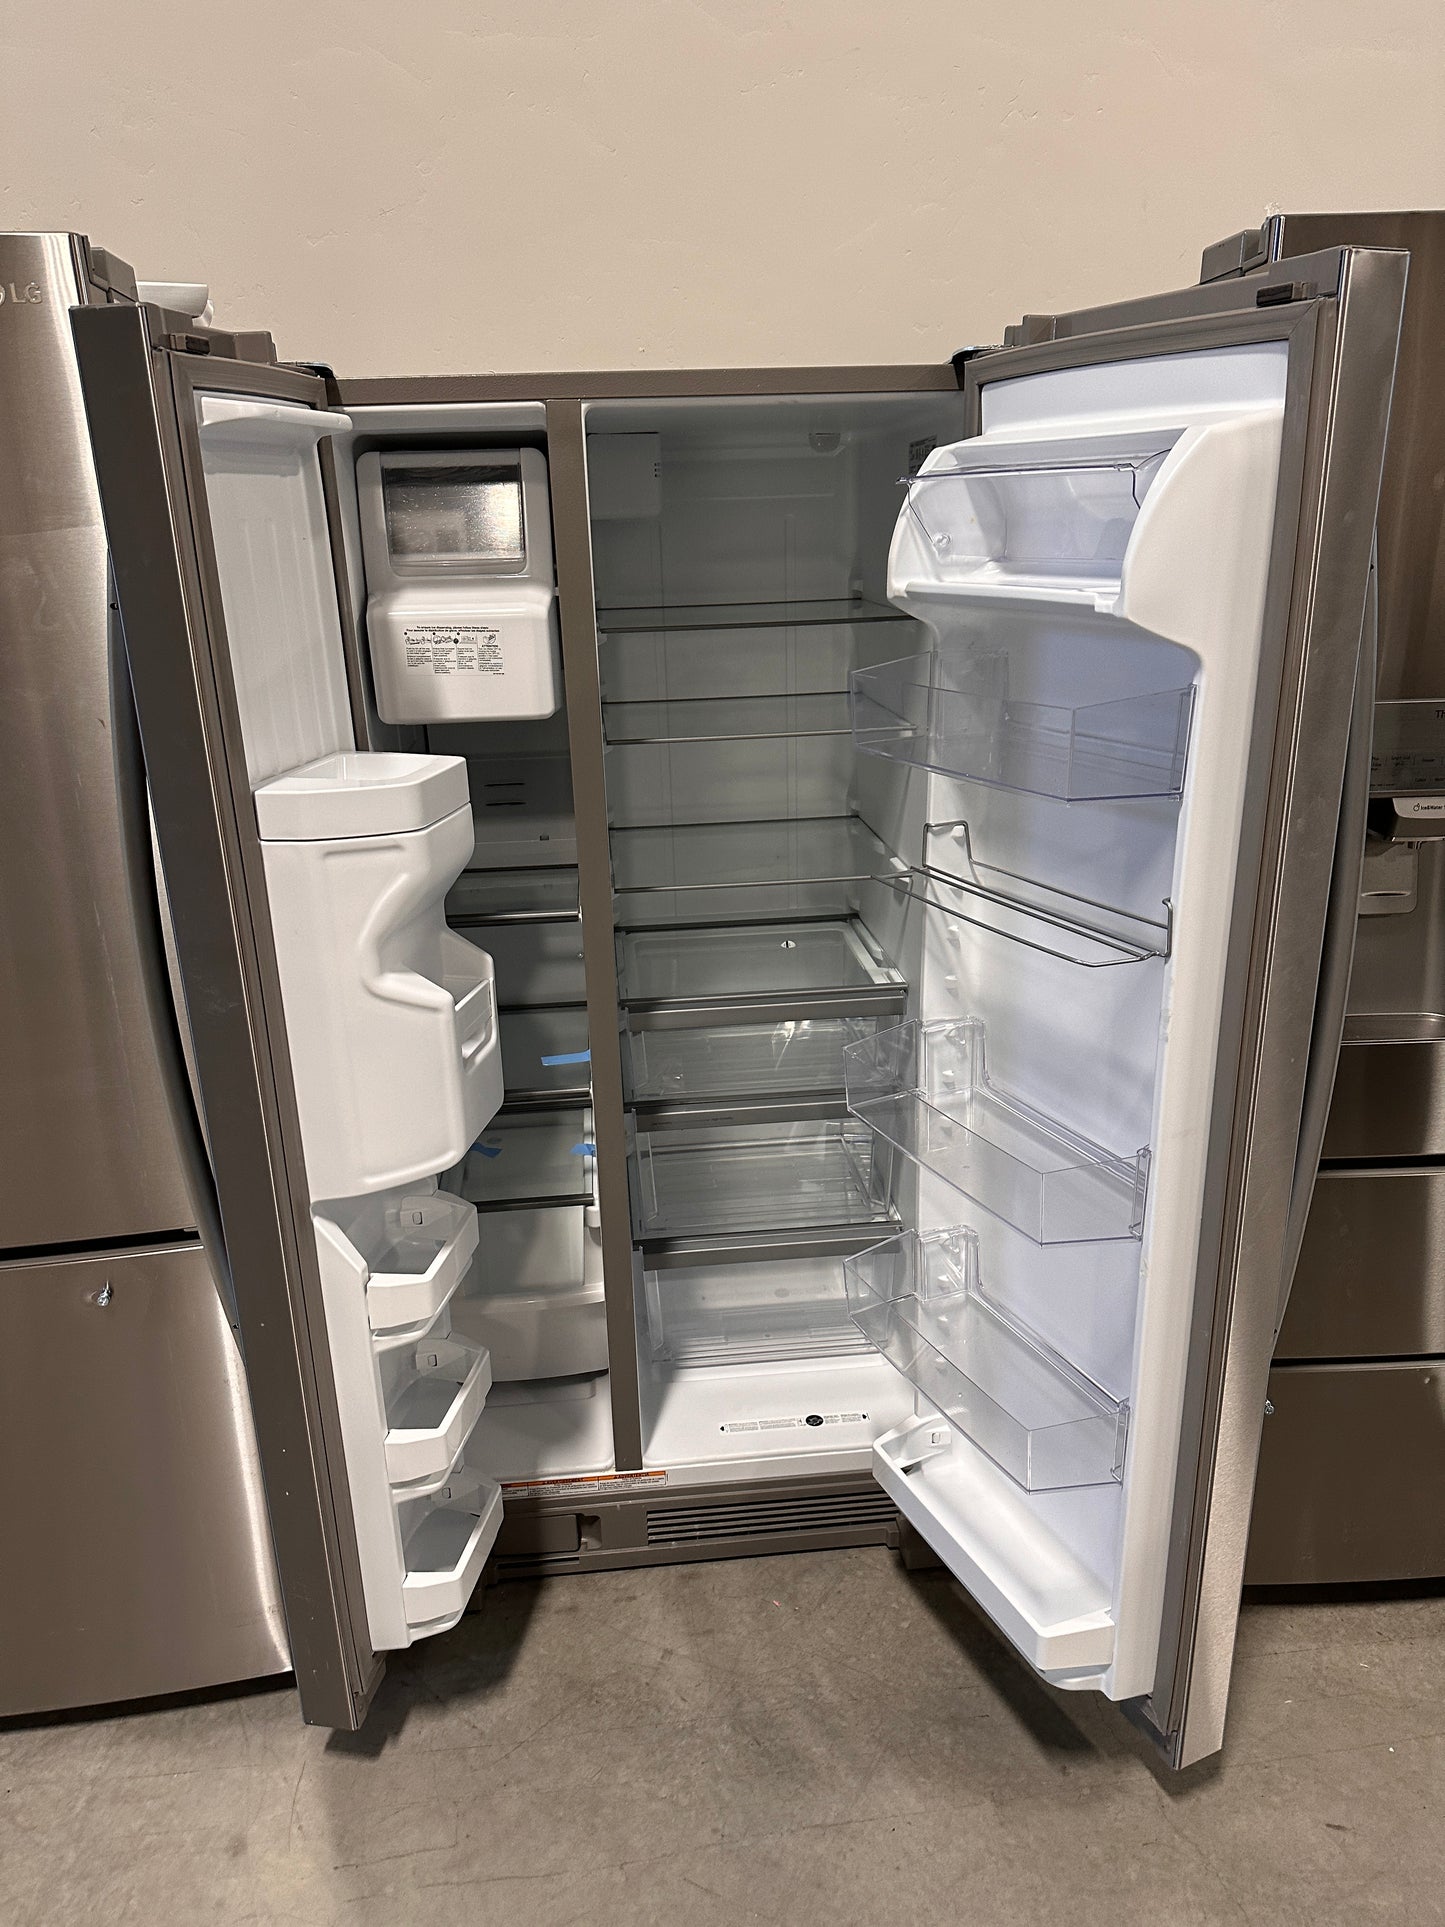 DISCOUNTED GREAT NEW WHIRLPOOL SIDE BY SIDE REFRIGERATOR MODEL: WRS321SDHZ REF13260